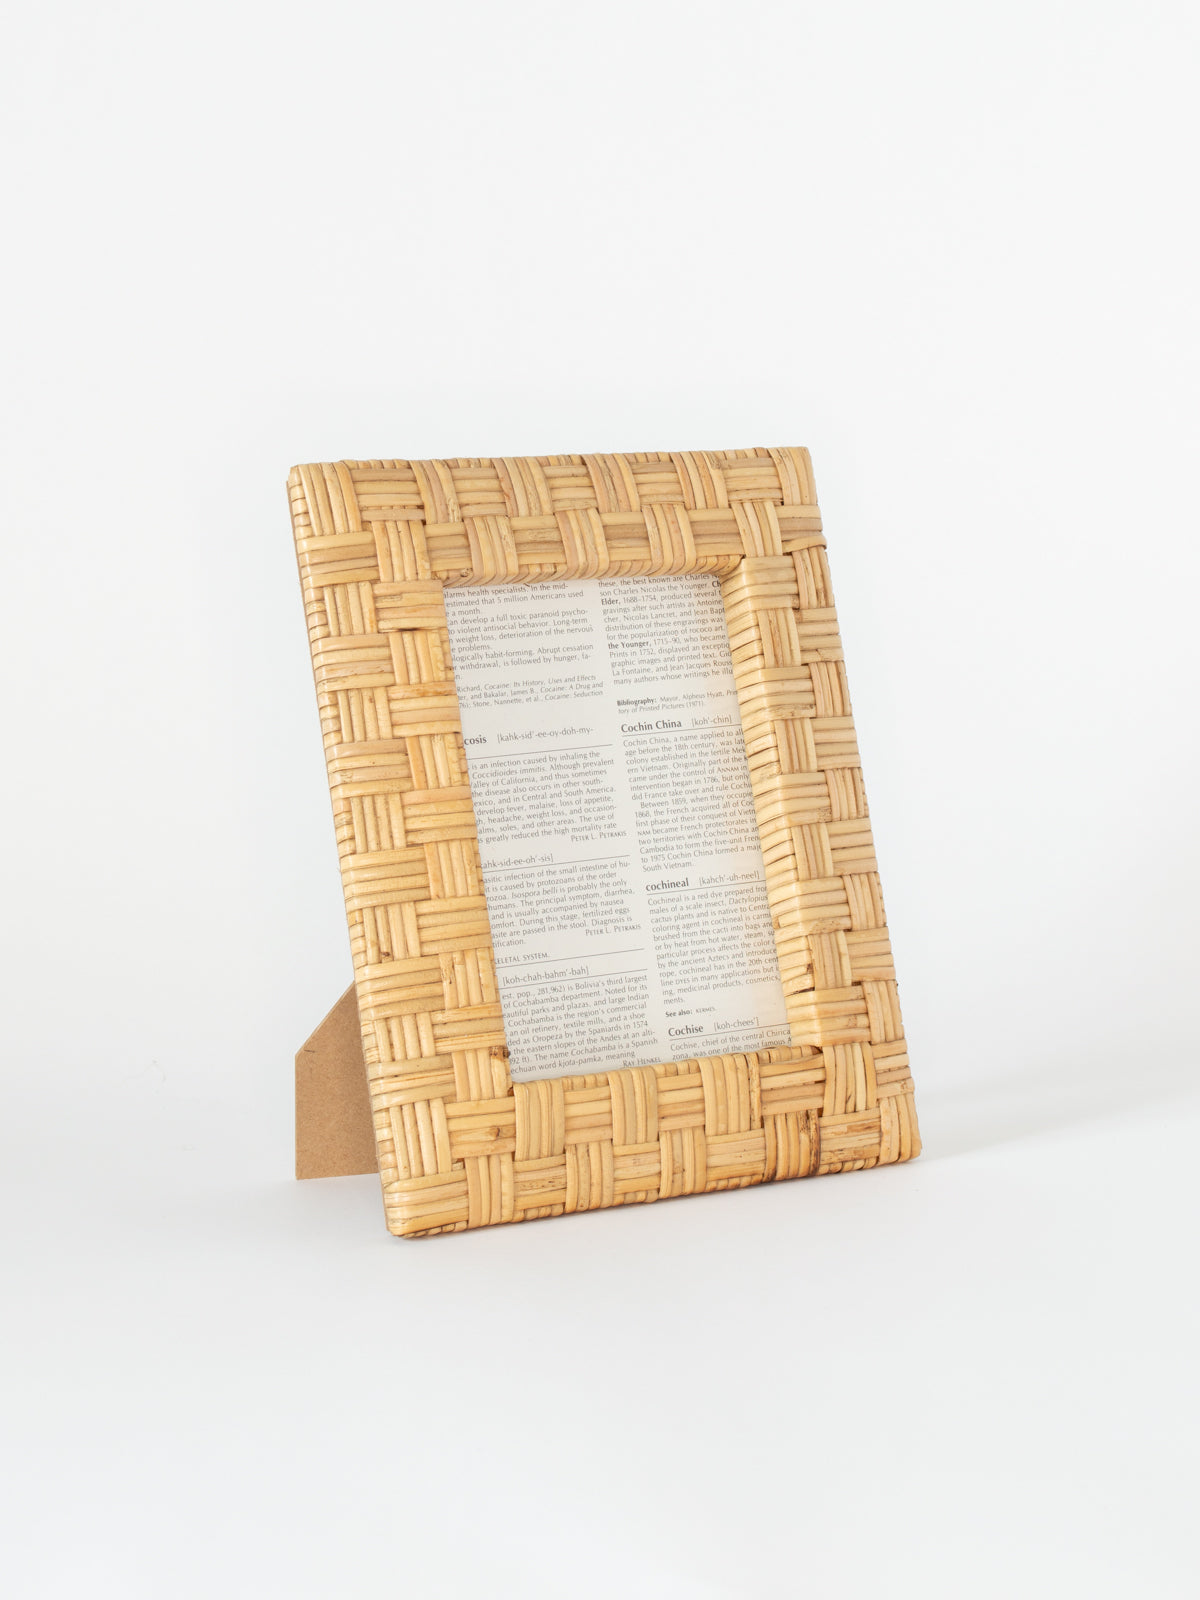 Large Rattan Woven Frame